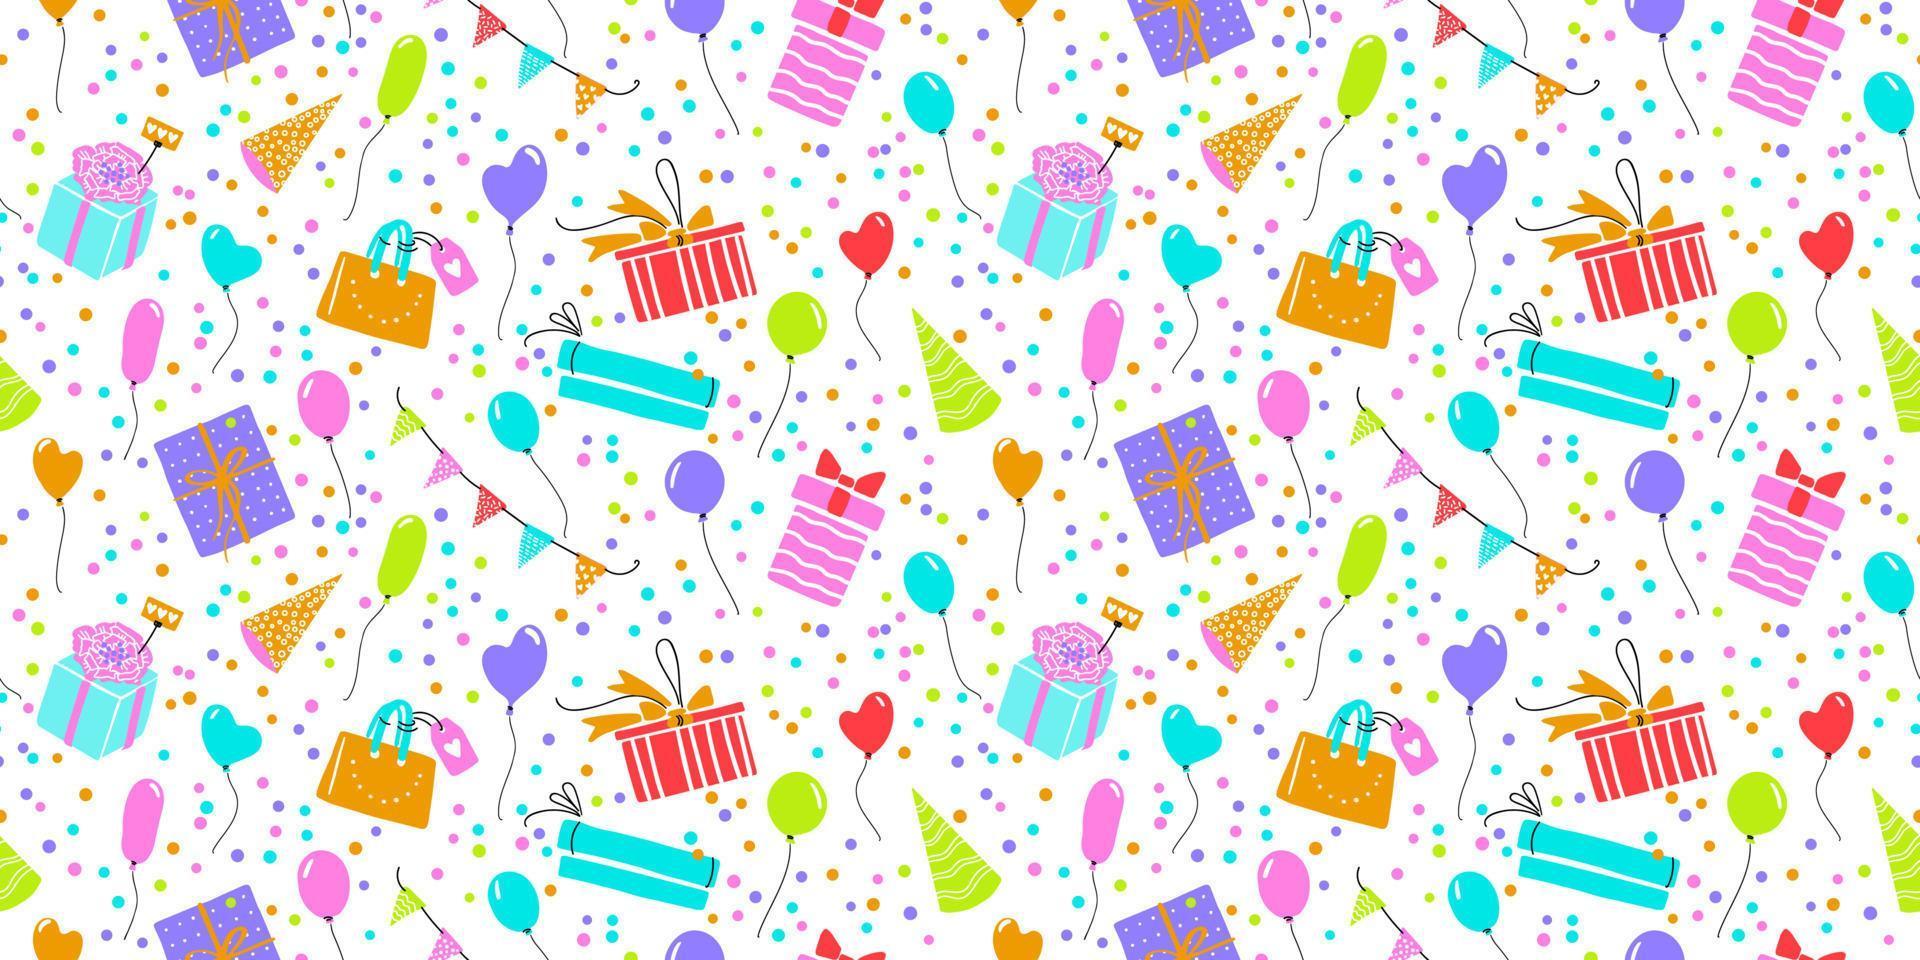 Celebration vector seamless pattern with gift boxes, confetti, balloons. Colorful simple happy birthday repeatable background.